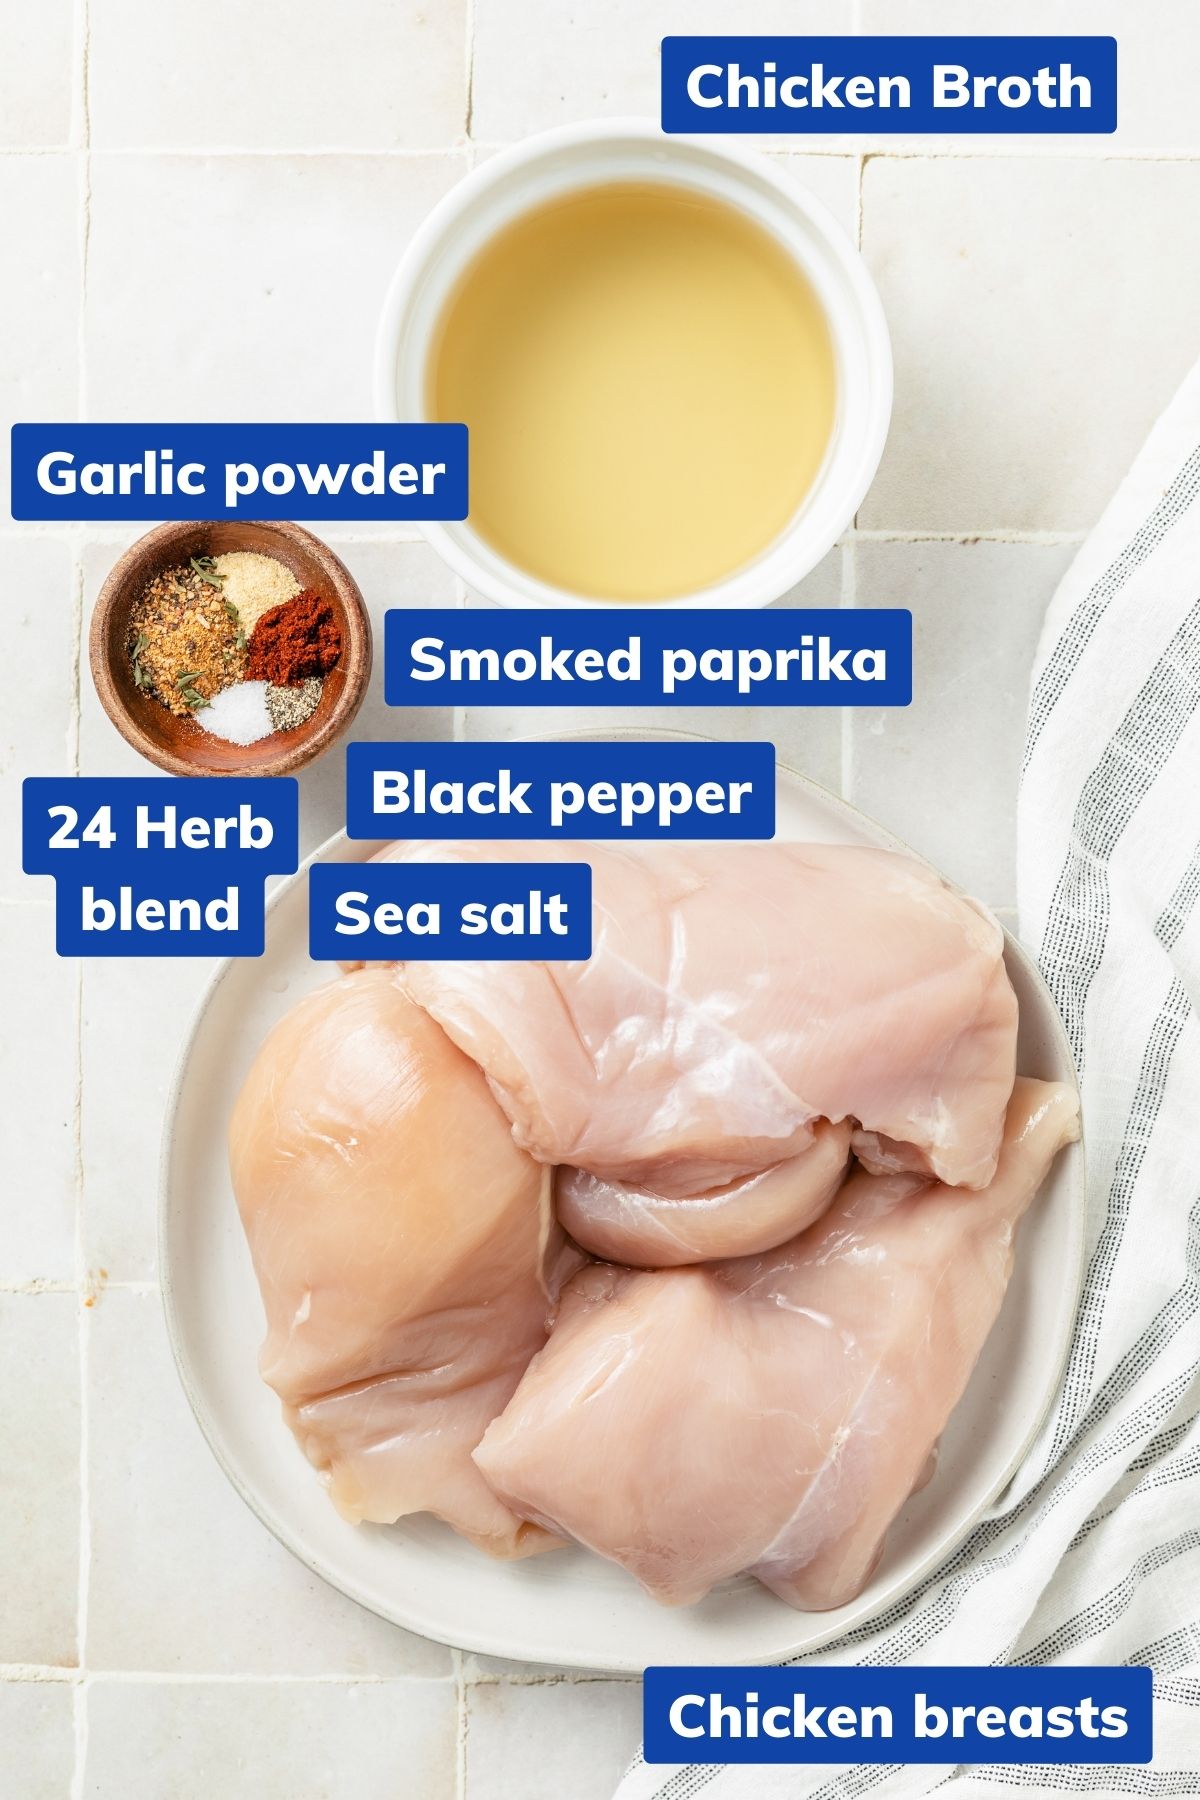 ingredients needed to make instant pot shredded chicken breast: Bowls of raw chicken, chicken broth, 24 herb blend, garlic powder, smoked paprika, sea salt, and black pepper ready for cooking.